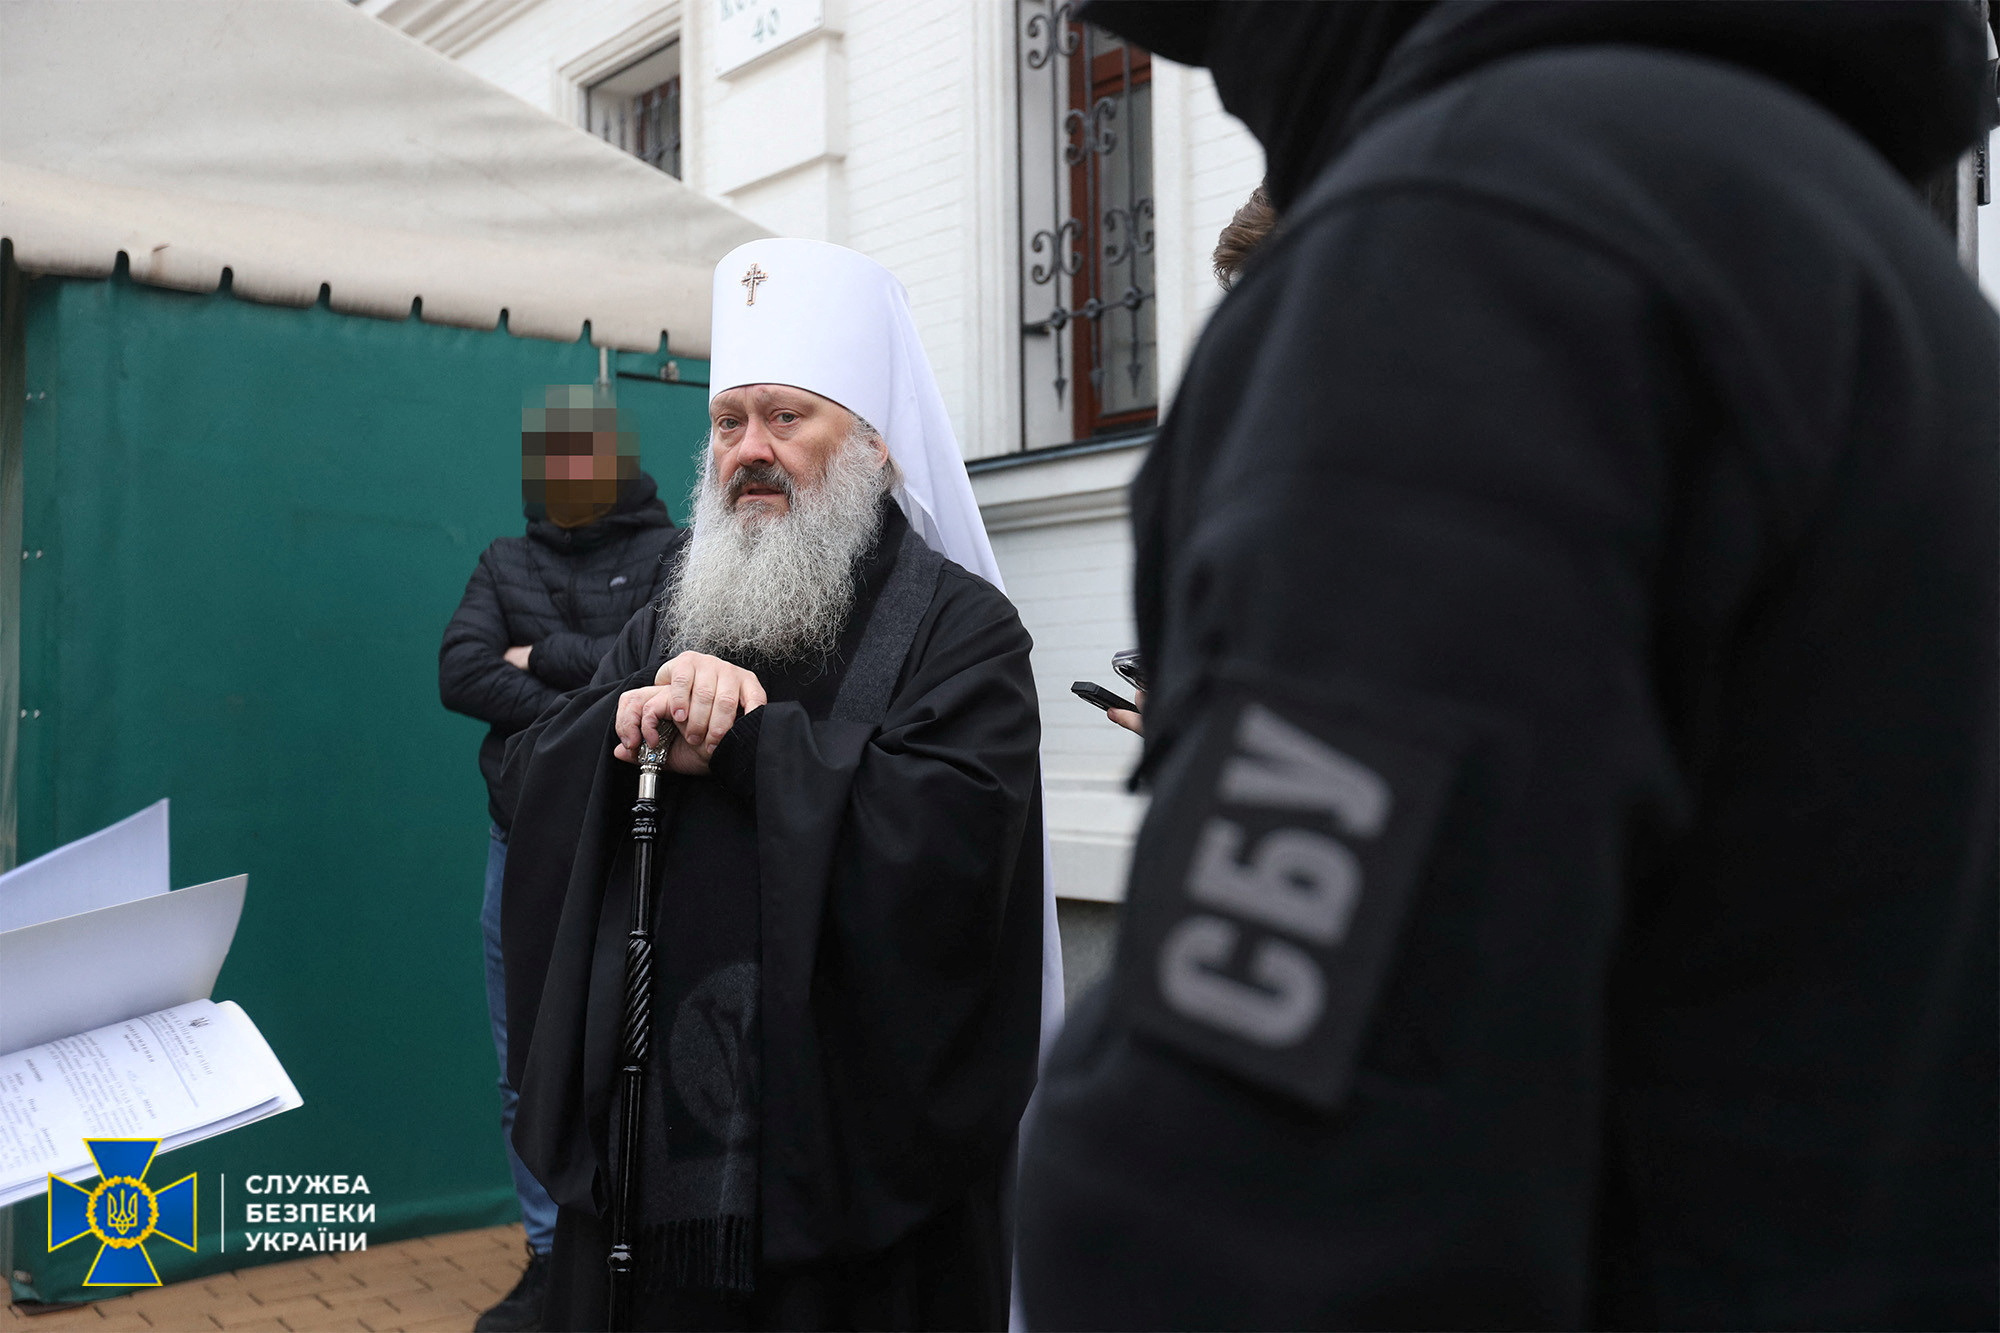 Metropolitan Pavlo of the Ukrainian Orthodox Church, accused of being linked to Moscow, receives an accusation letter from members of the State Security Service in Kyiv